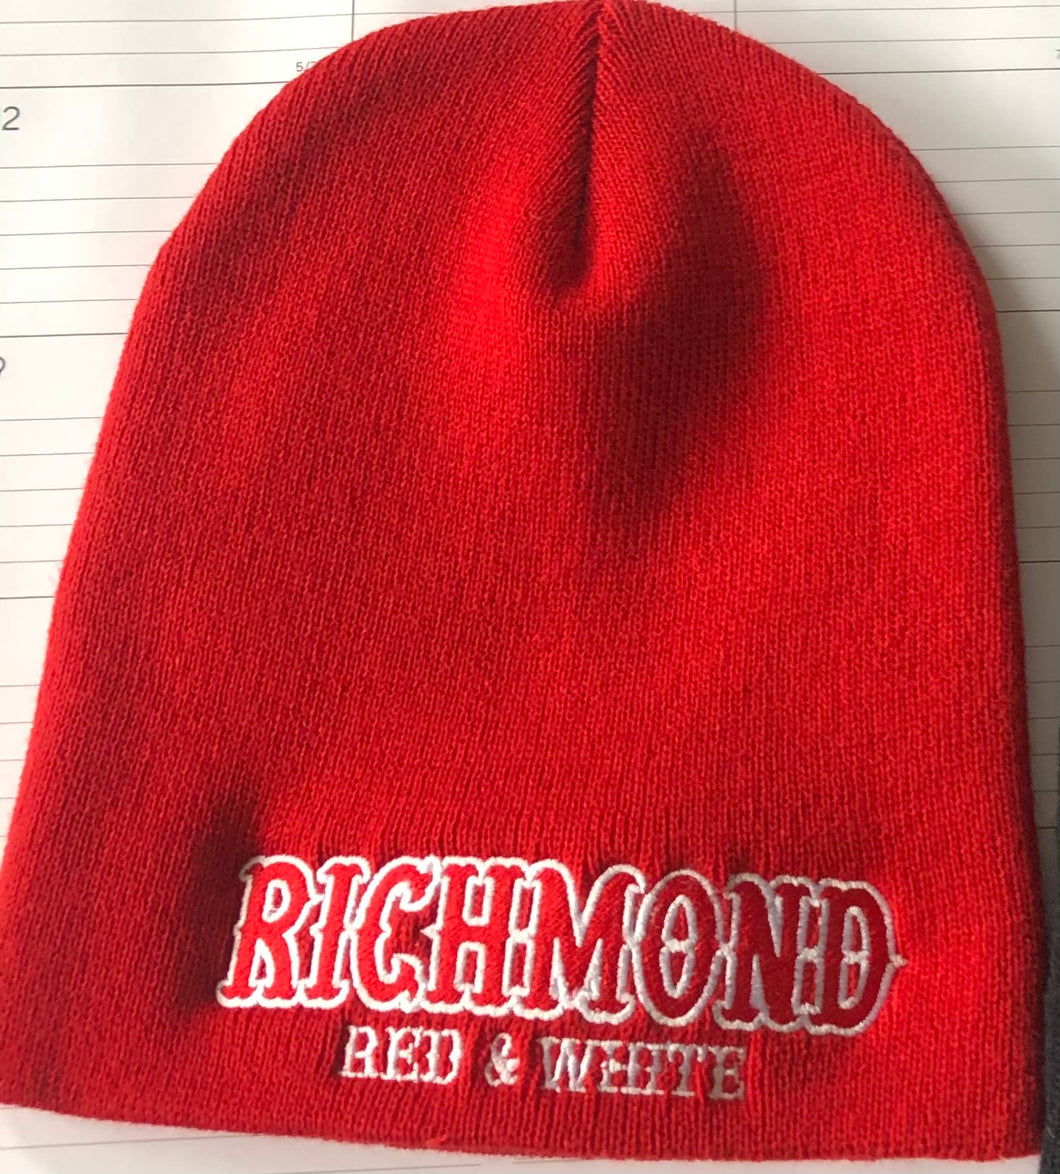 Red beanie with embroidered RICHMOND RED &WHITE on front